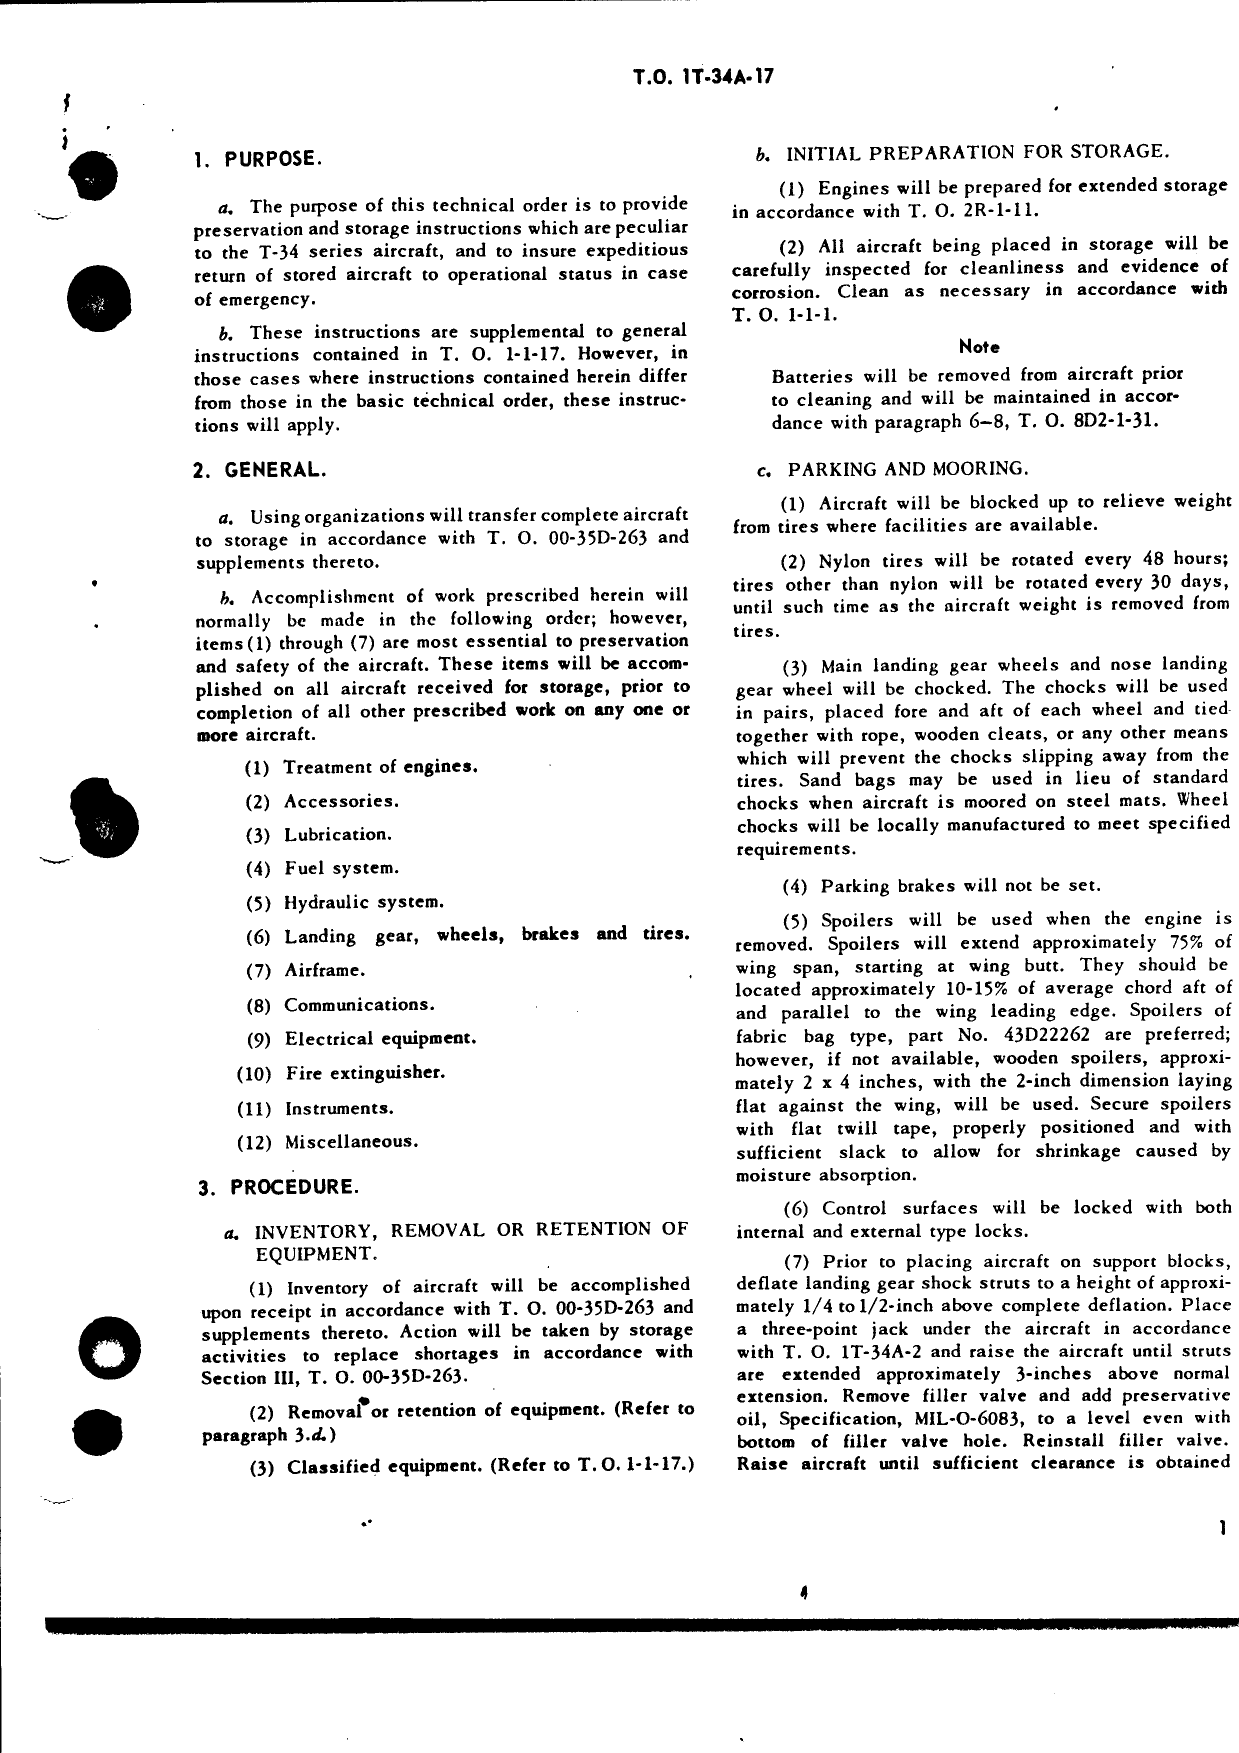 Sample page 3 from AirCorps Library document: Storage Instructions - Storage Instructions of Aircraft T-34 Series